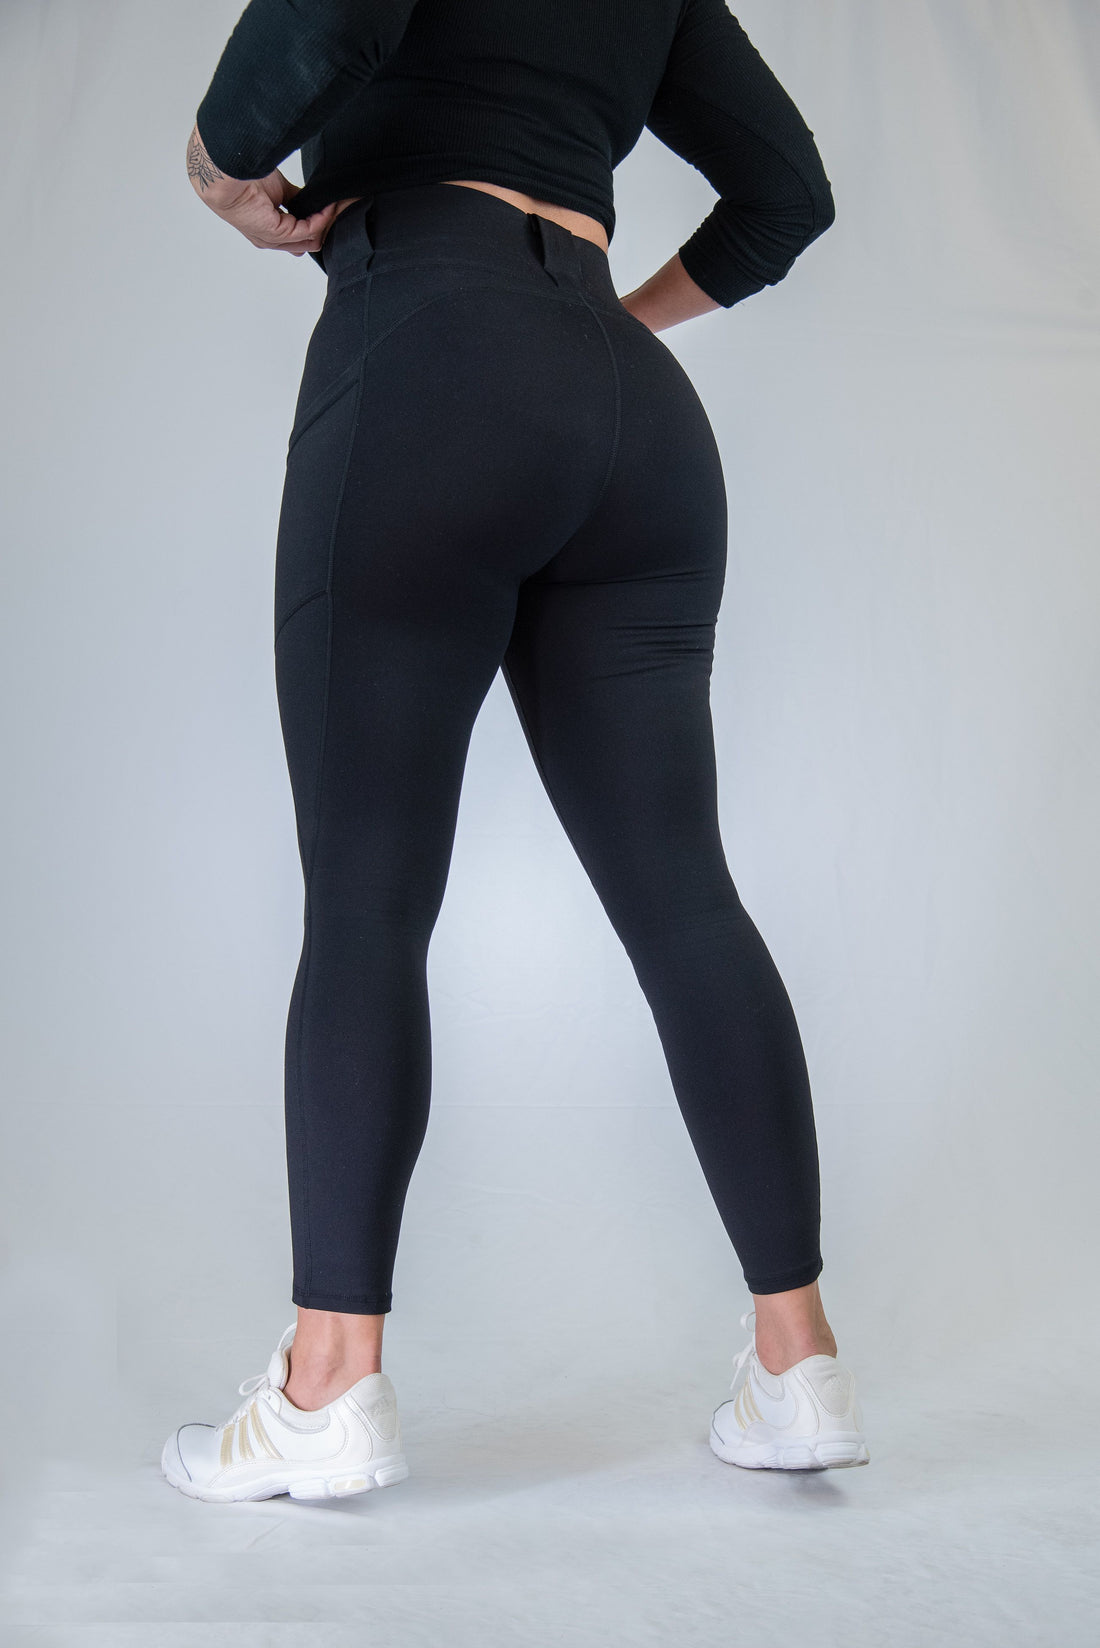 VALANDY High Waisted Leggings for Women Buttery Soft Stretchy Tummy Control  Workout Yoga Running Pants One&Plus Size, 7 Packs-black/Black/Dark  Gray/Navy/Blue/Ins Green/Dark Pink, XXL : Buy Online at Best Price in KSA 